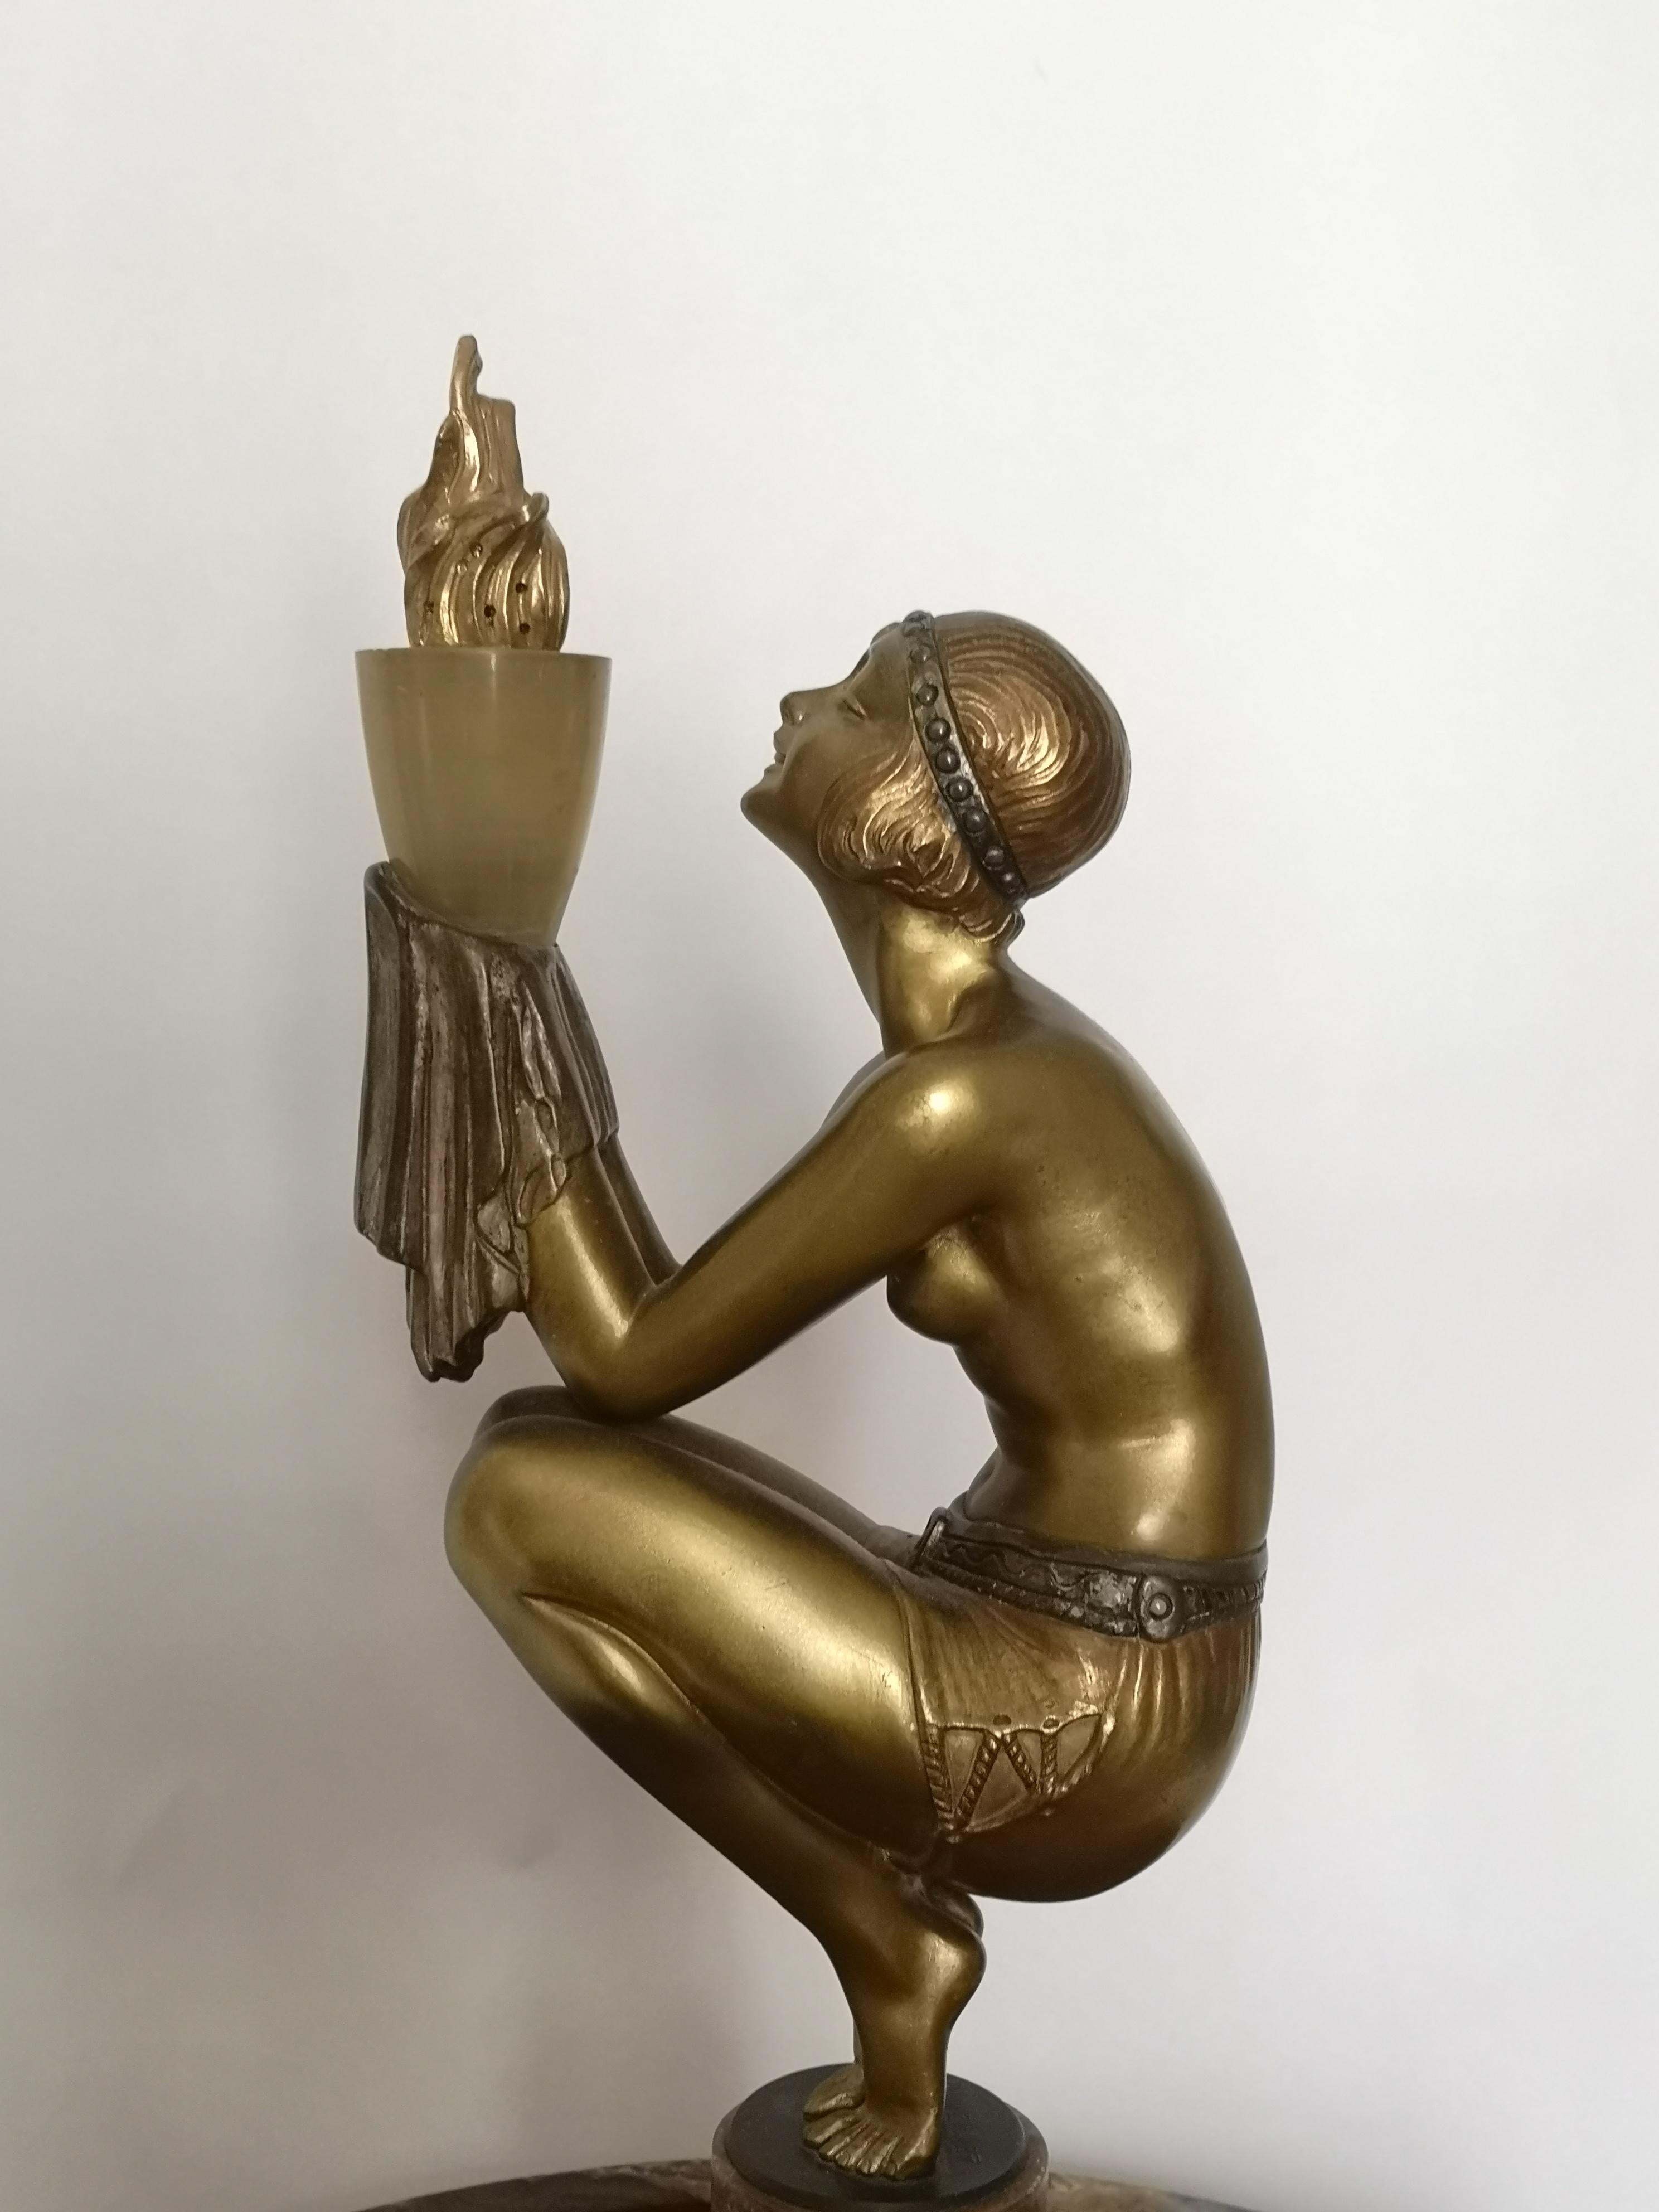 This Art Deco sculpture, designed as a cold painted gilt bronze crouching 1920s dancer holding a light with an ormolu flame in her hands, raised in the centre of a circular onyx base. Signed at the base of the bronze.
Duvernet is well known for his